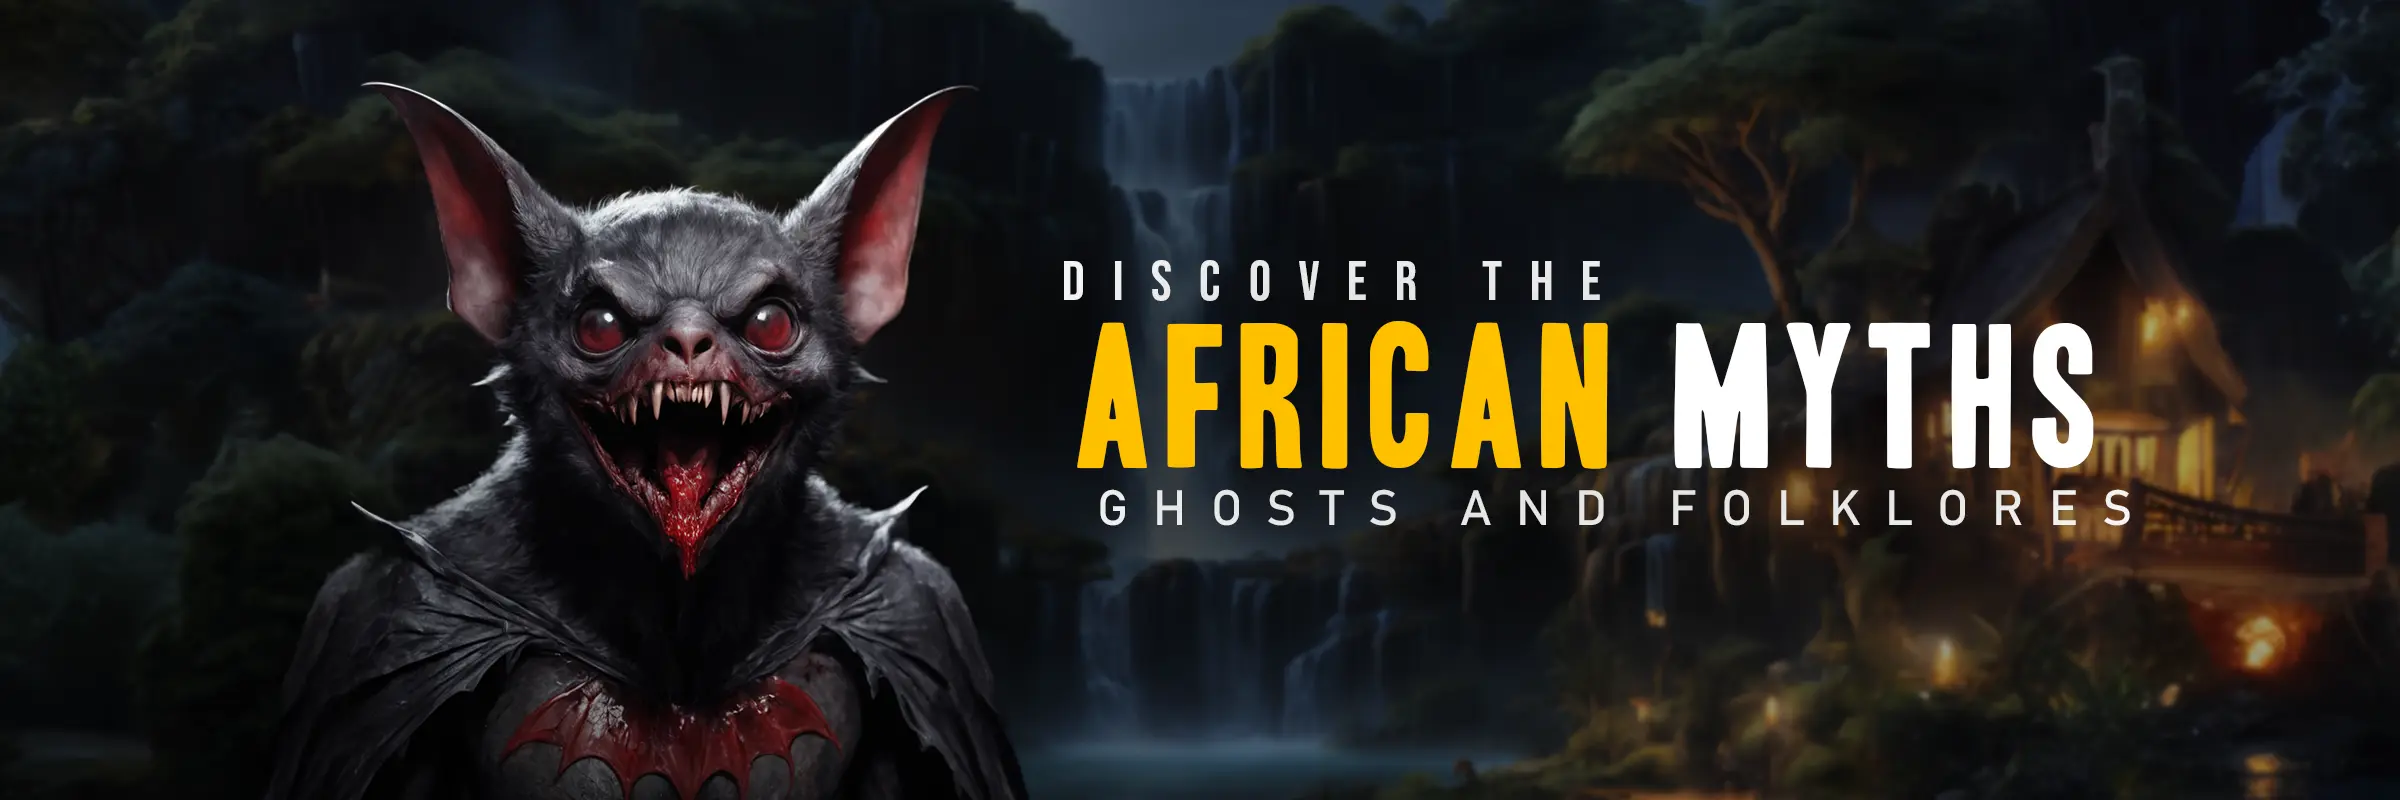 AFRICAN MYTHS AND FOLKLORE